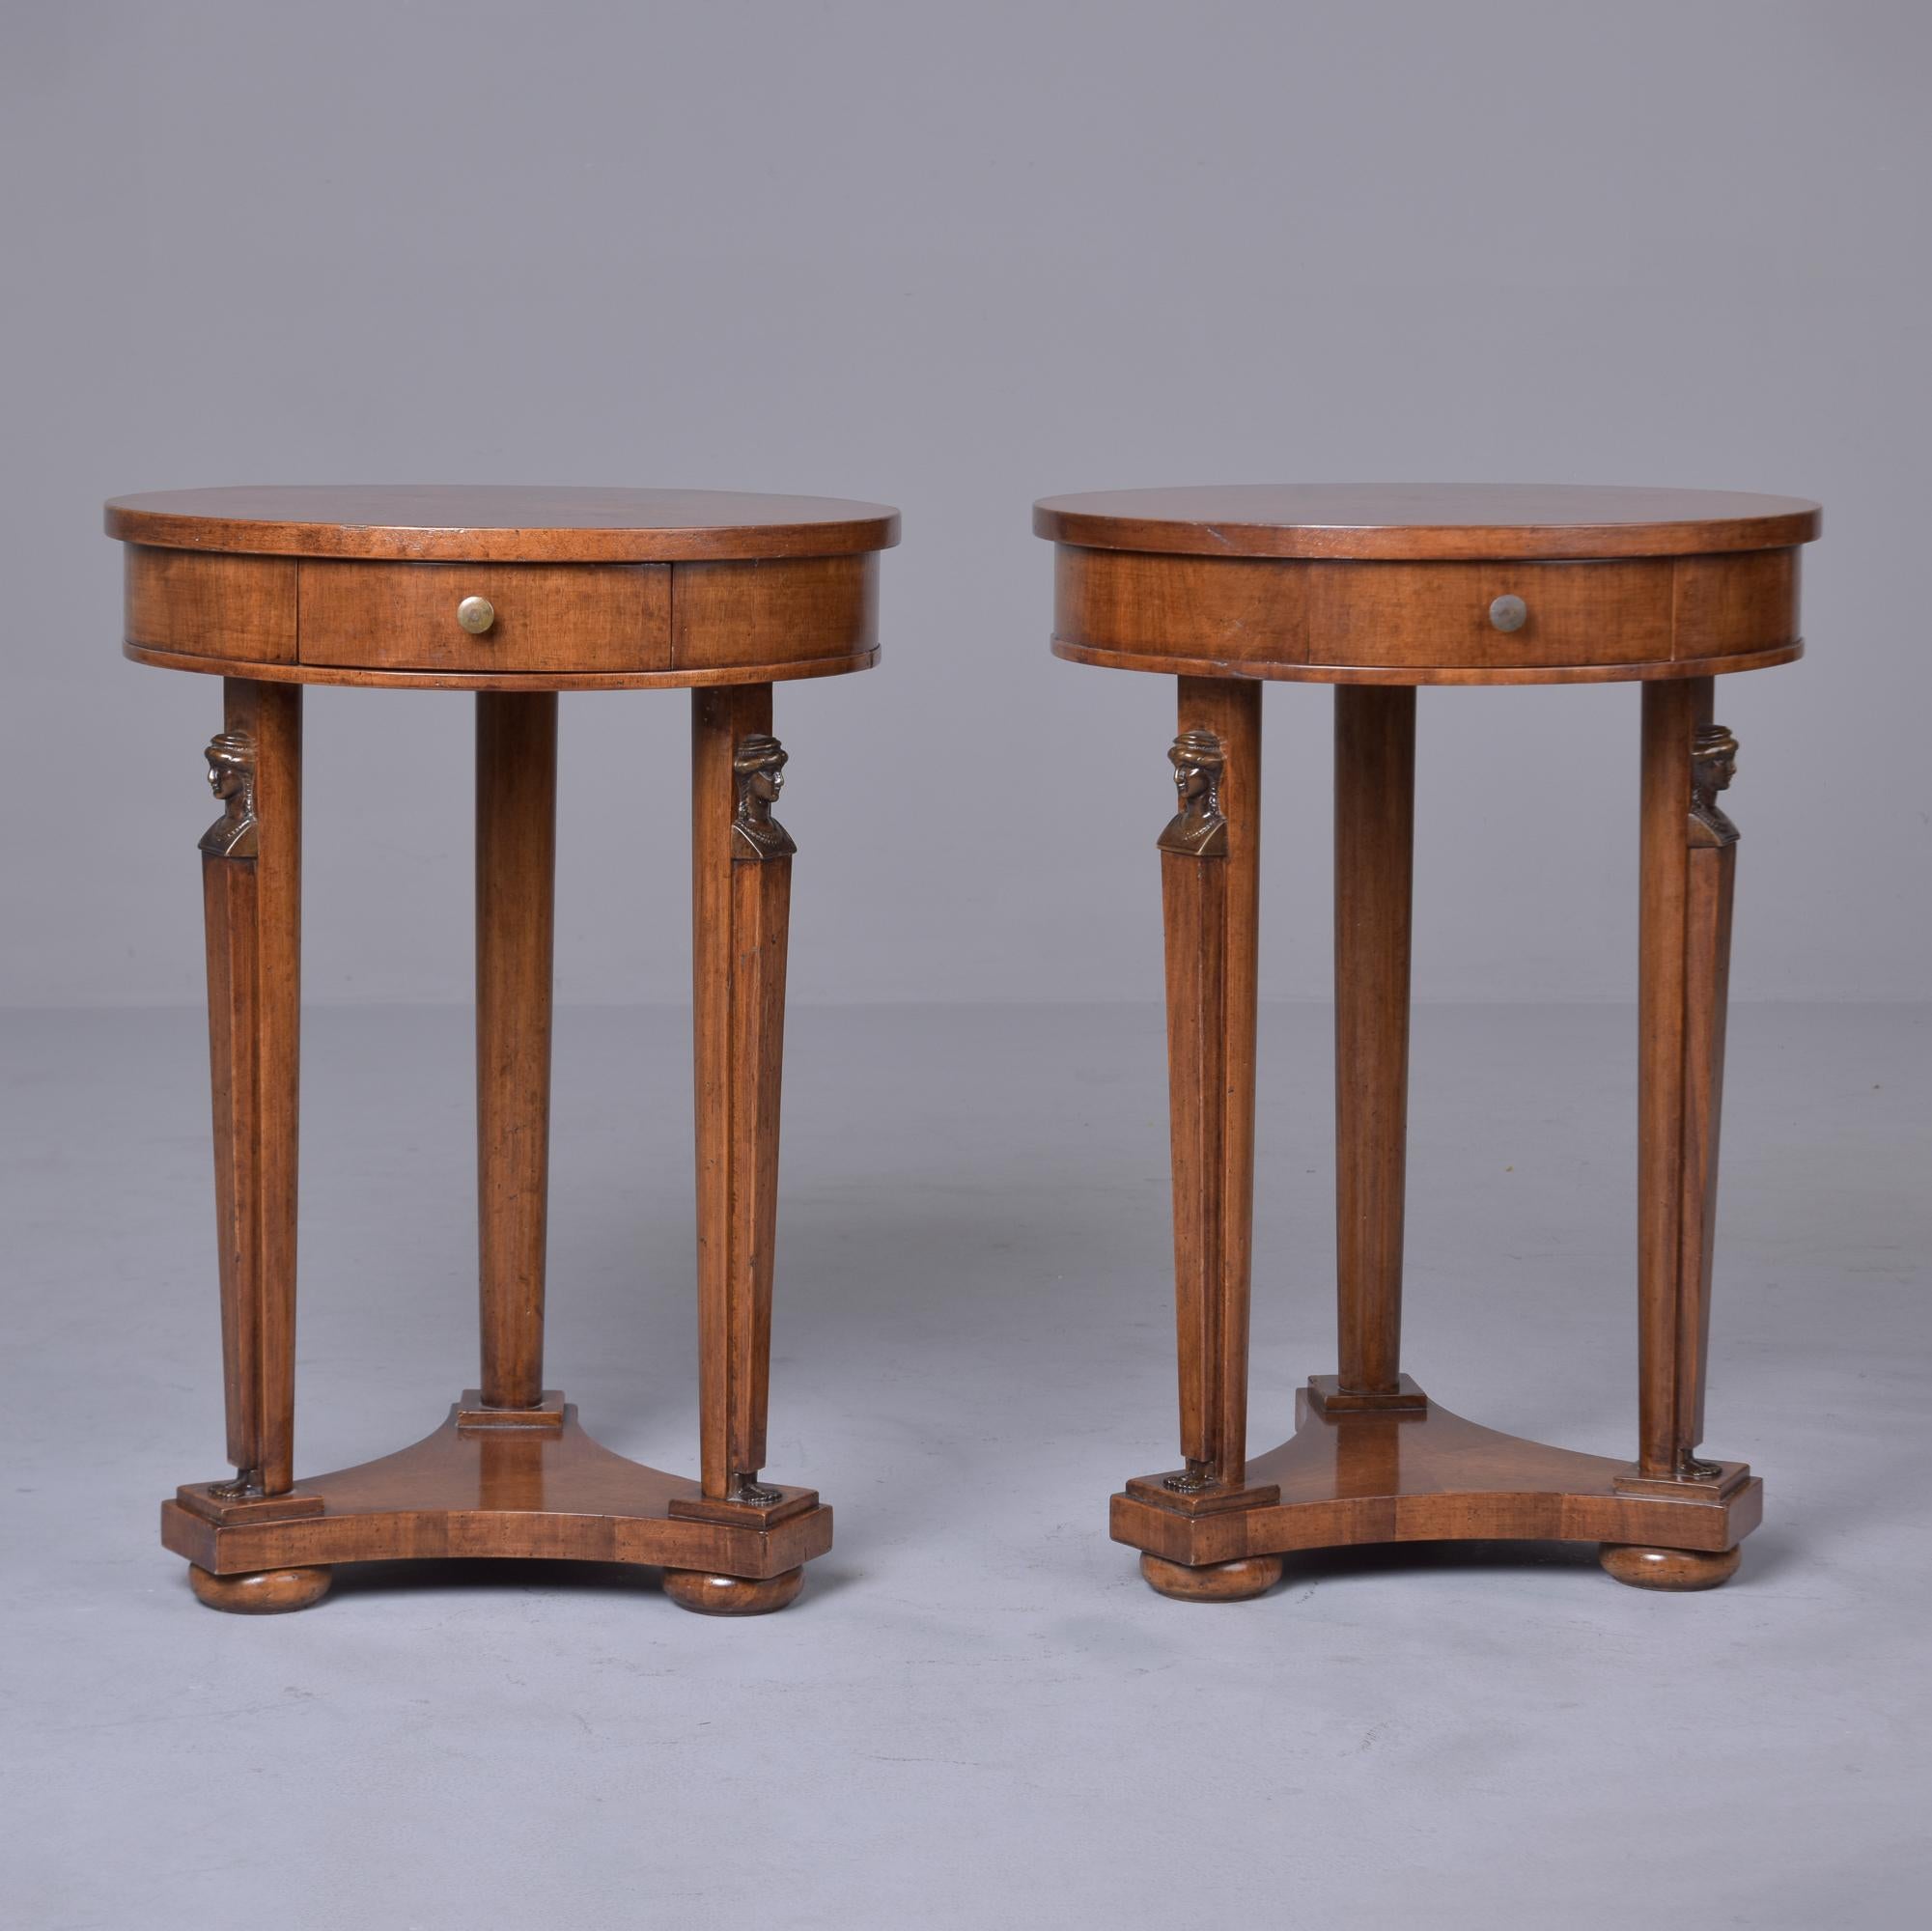 Found in France, this pair of Louis XVI style side tables date from approximately 1900. Each of these round tables has a decorative veneer pattern on top, small functional drawer and carved, classical busts at the top of the three legged base.